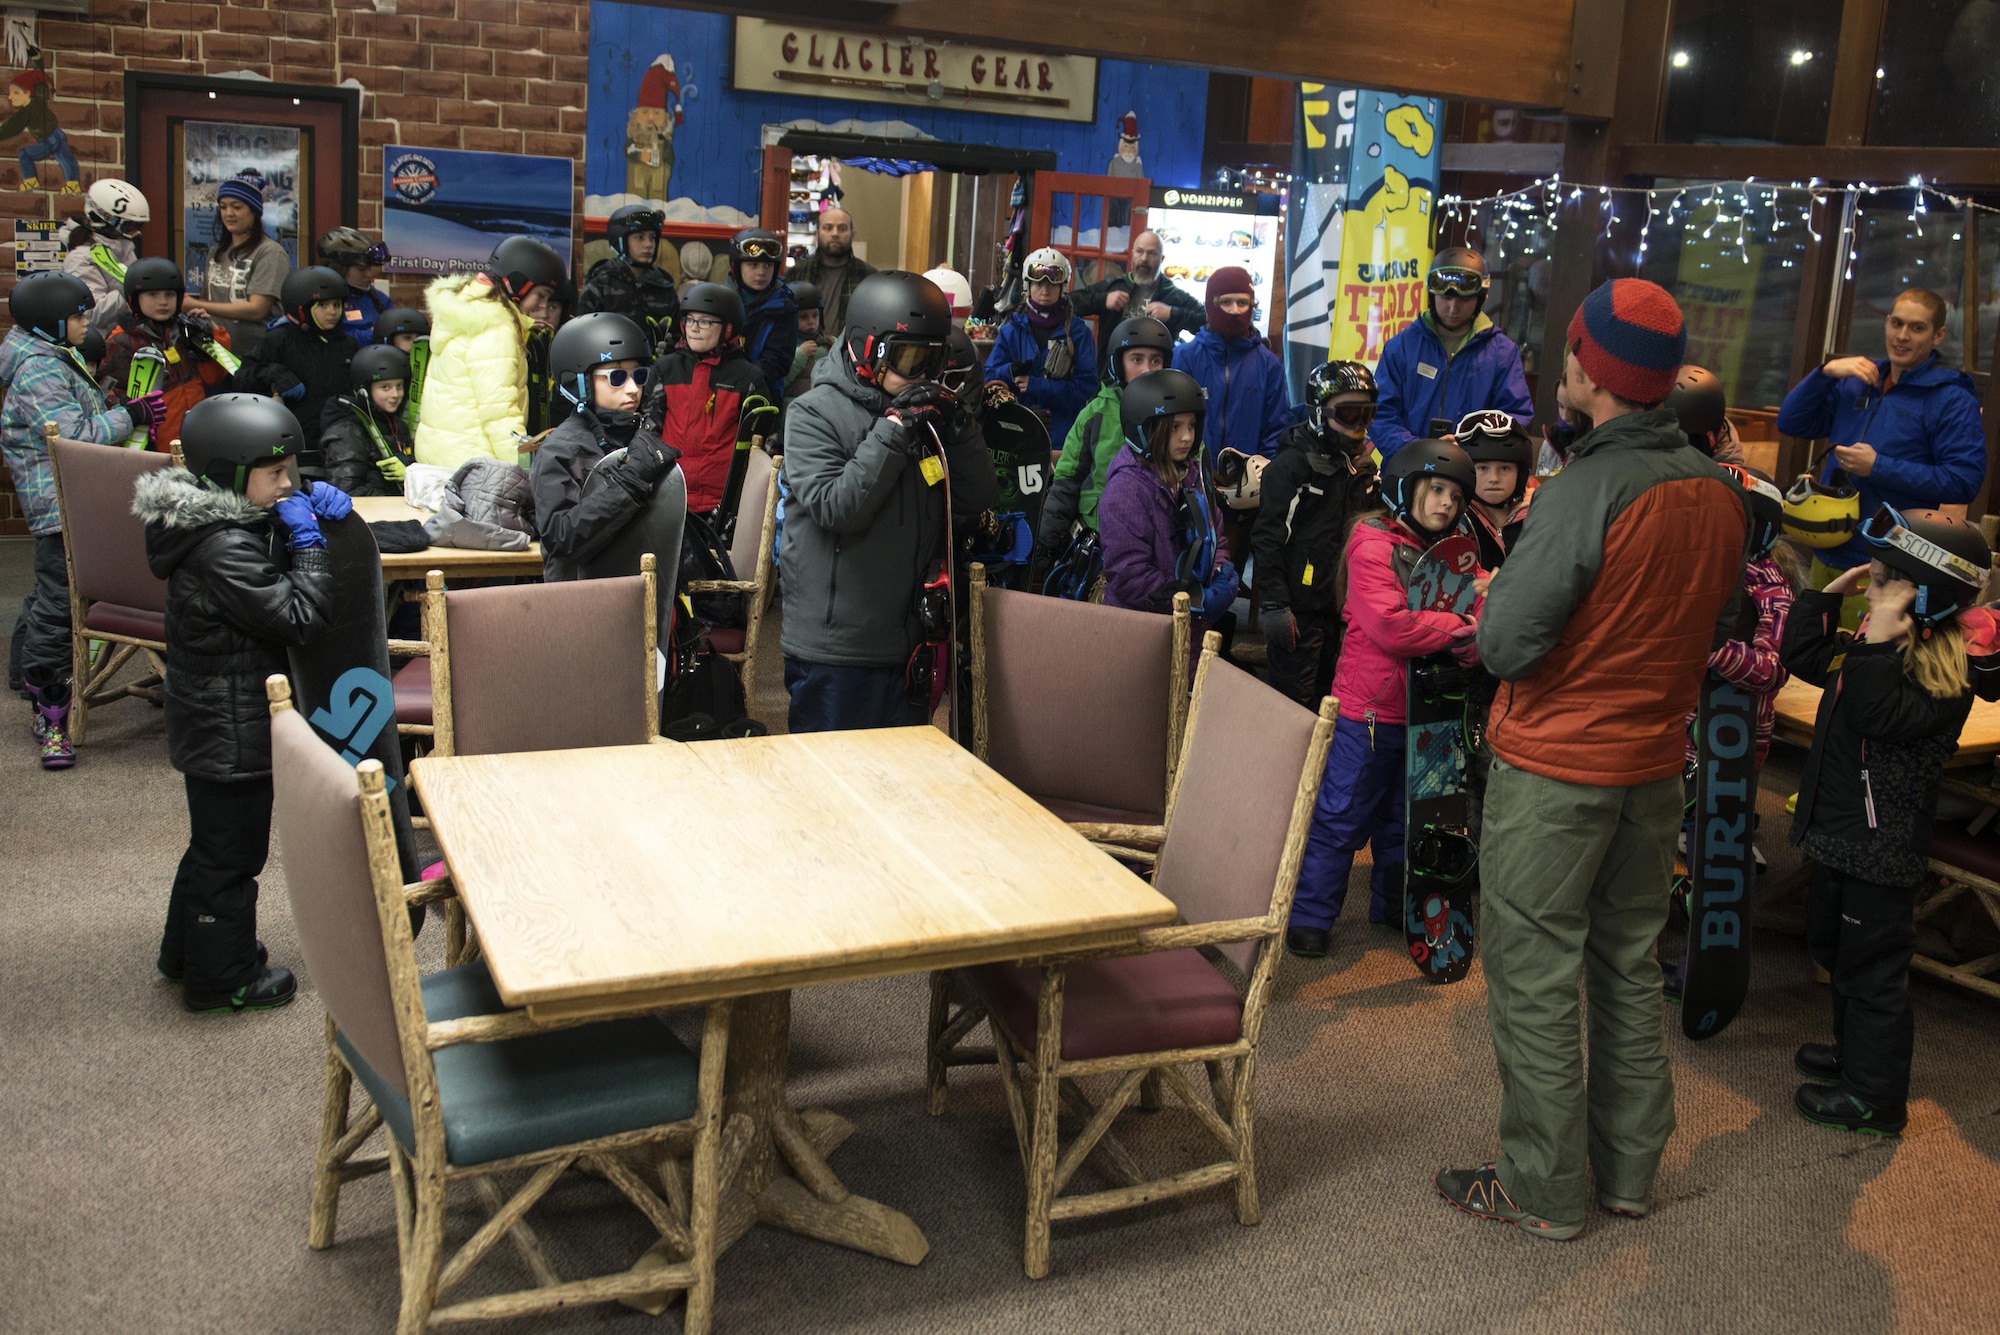 Karl Lavtar, Outdoor Adventure Program lead, instructs children at the Hillberg Ski Area before their first day of youth snow sports lessons at Joint Base Elmendorf-Richardson, Alaska, Dec. 1, 2017. The Kennecott Youth Center and Hillberg partnered up to provide children transportation to and from each facility, equipment rentals, and two-hour instruction on how to ski or snowboard.